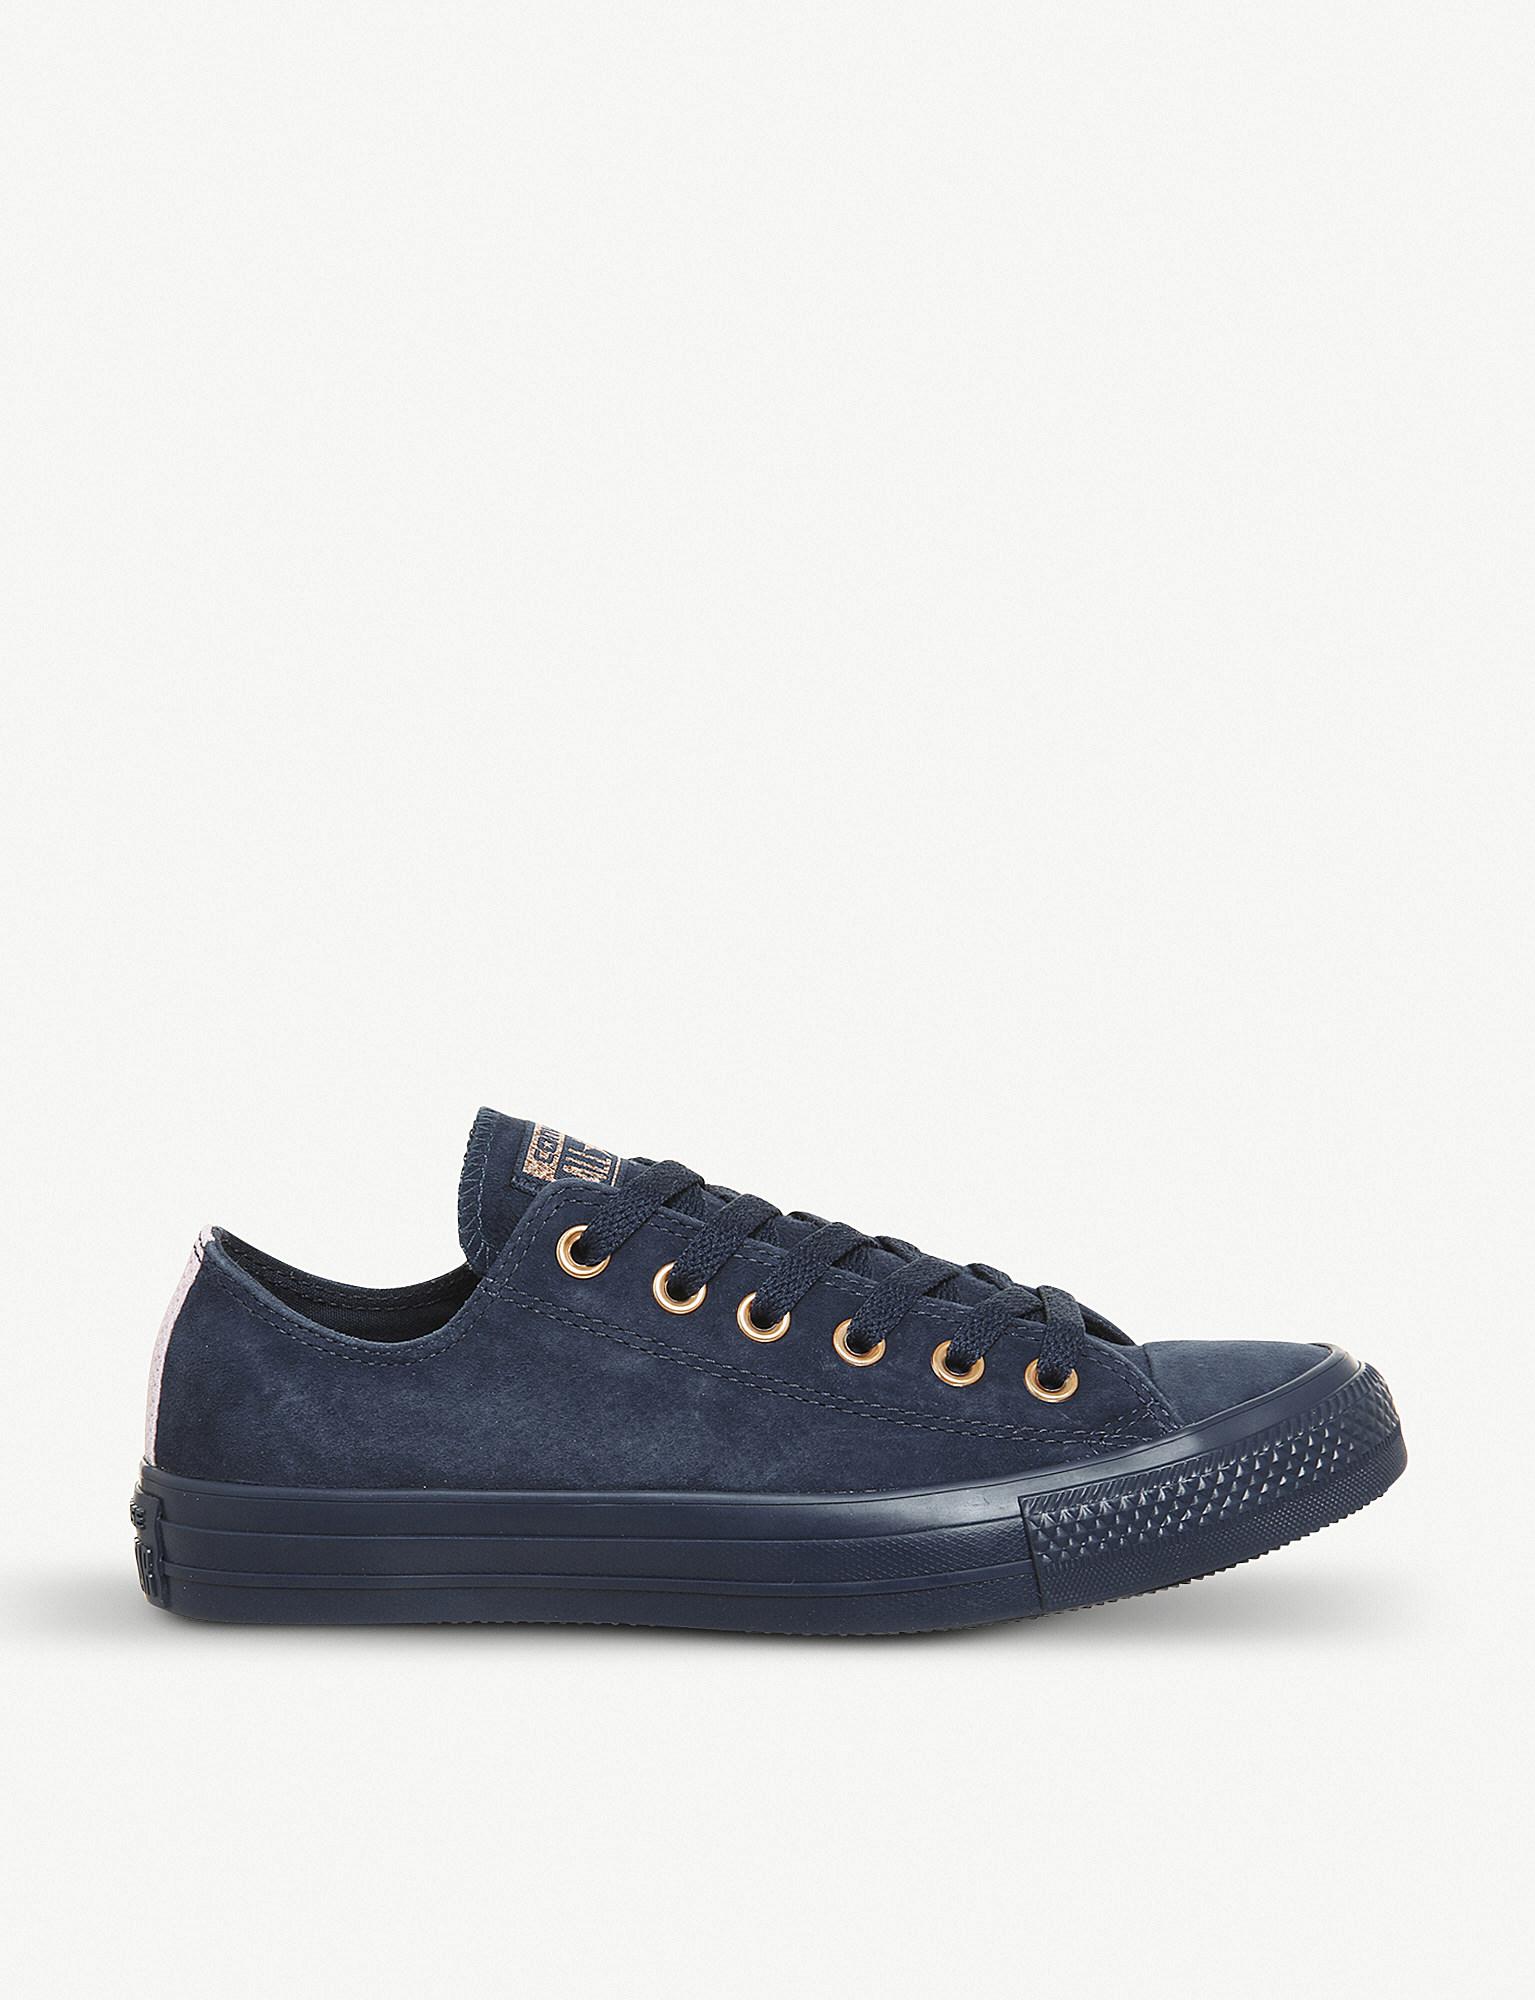 blue leather converse womens